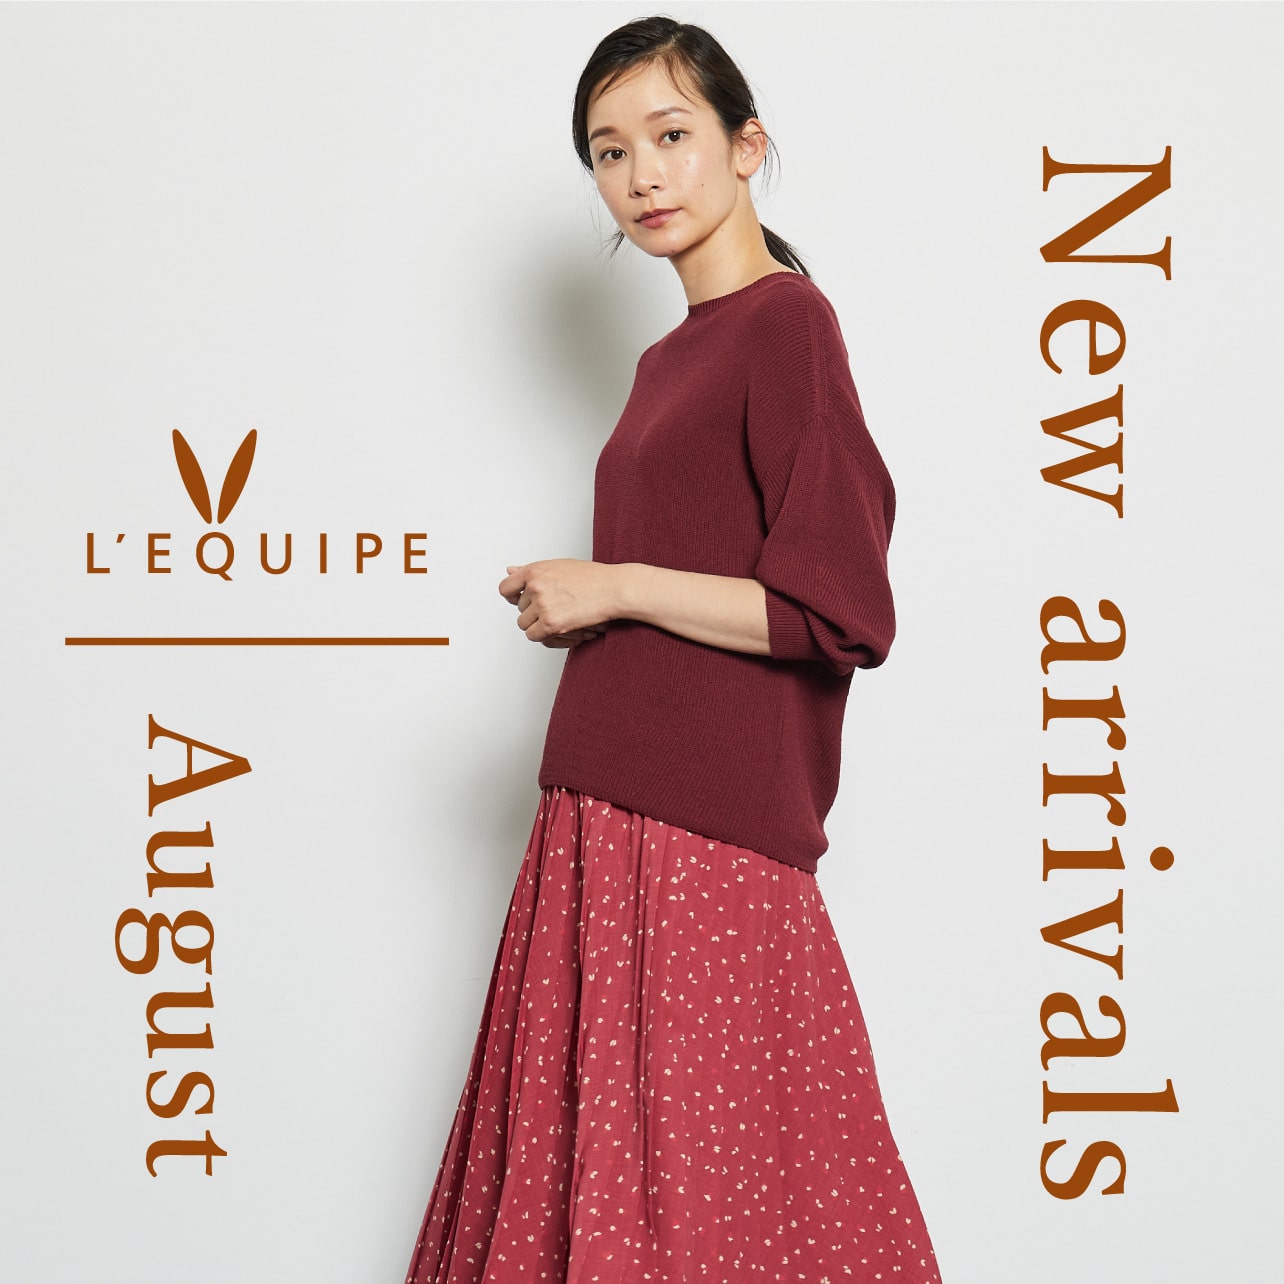 August New arrivals